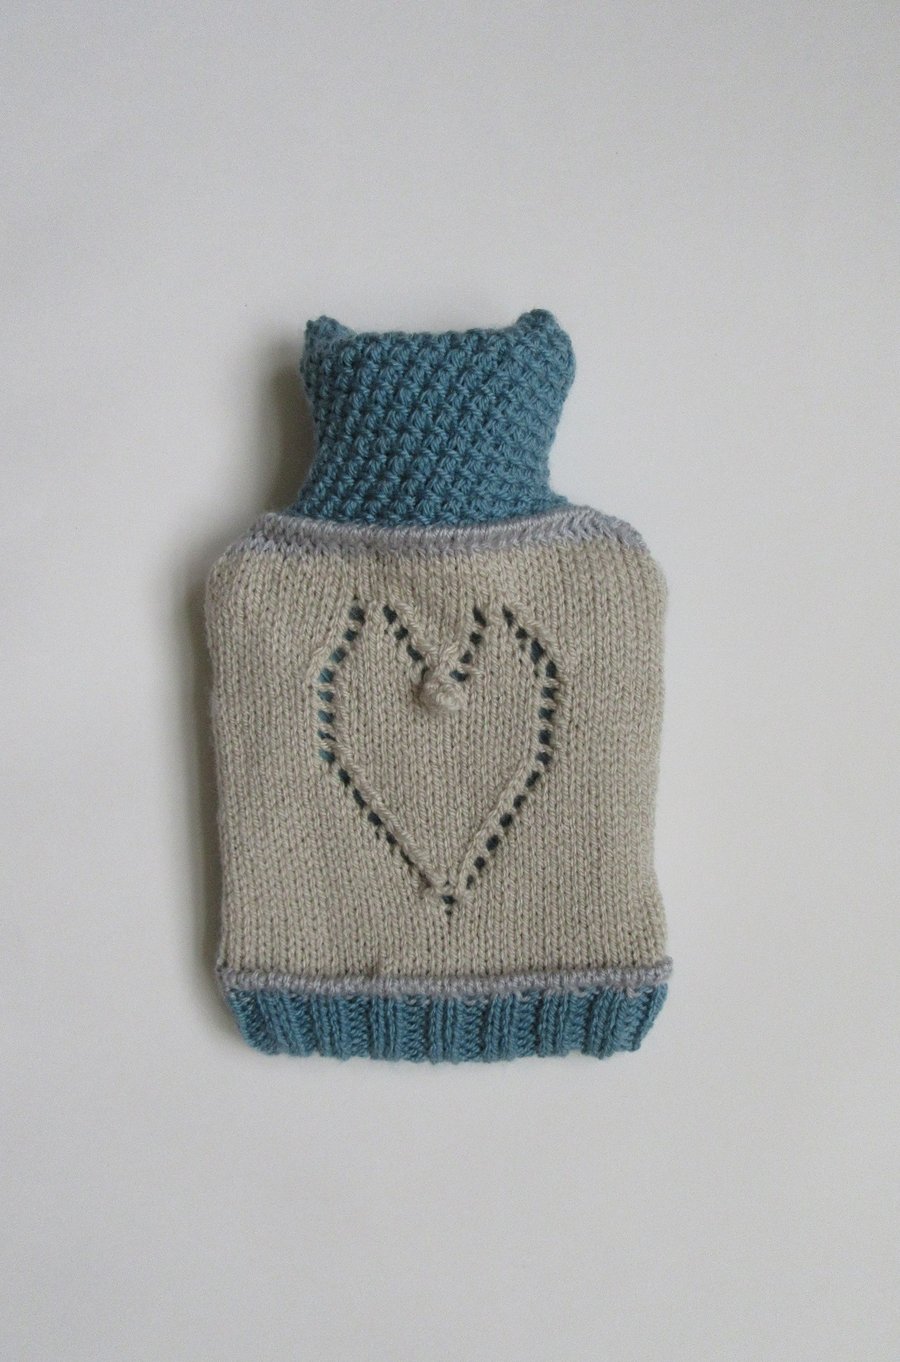 Hot water bottle cover - blue lacy heart